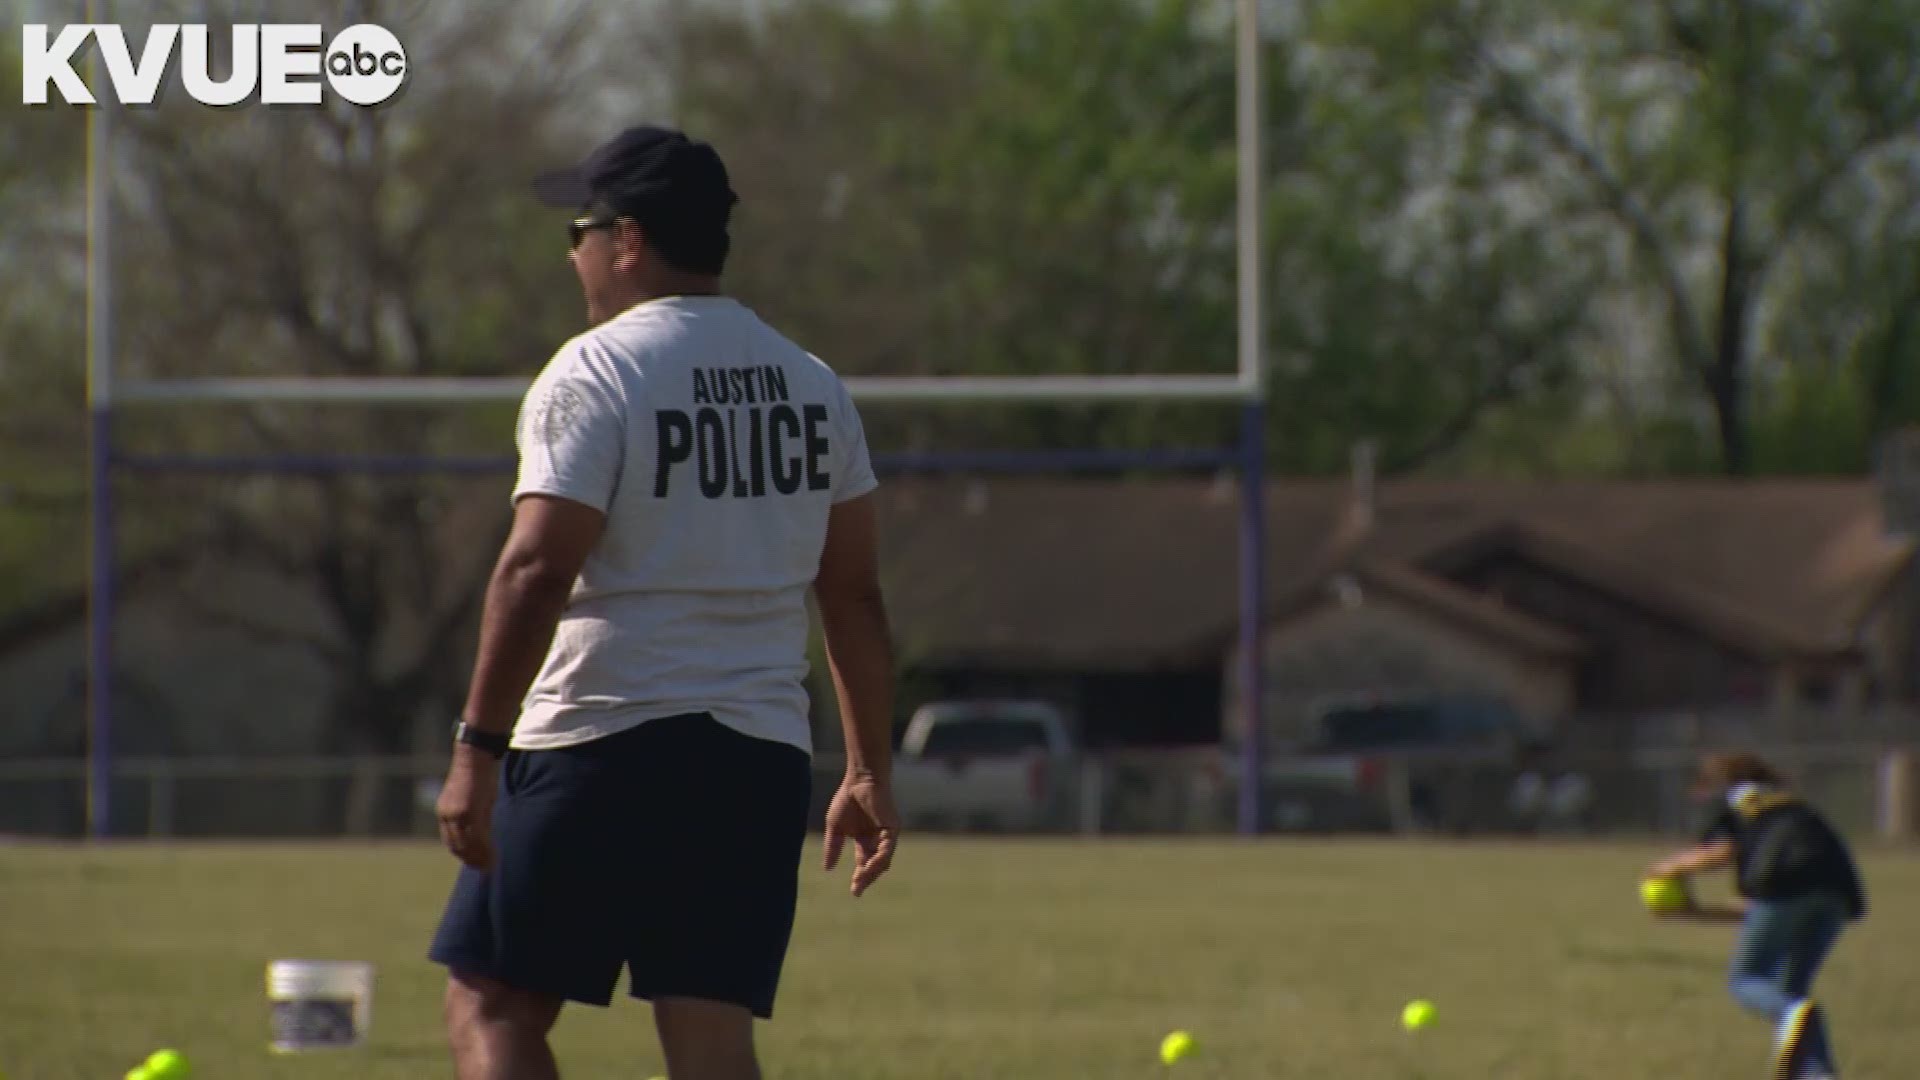 More than 150 youth will join Austin Police Department officers for multi-sport clinics at LBJ Early College High School.